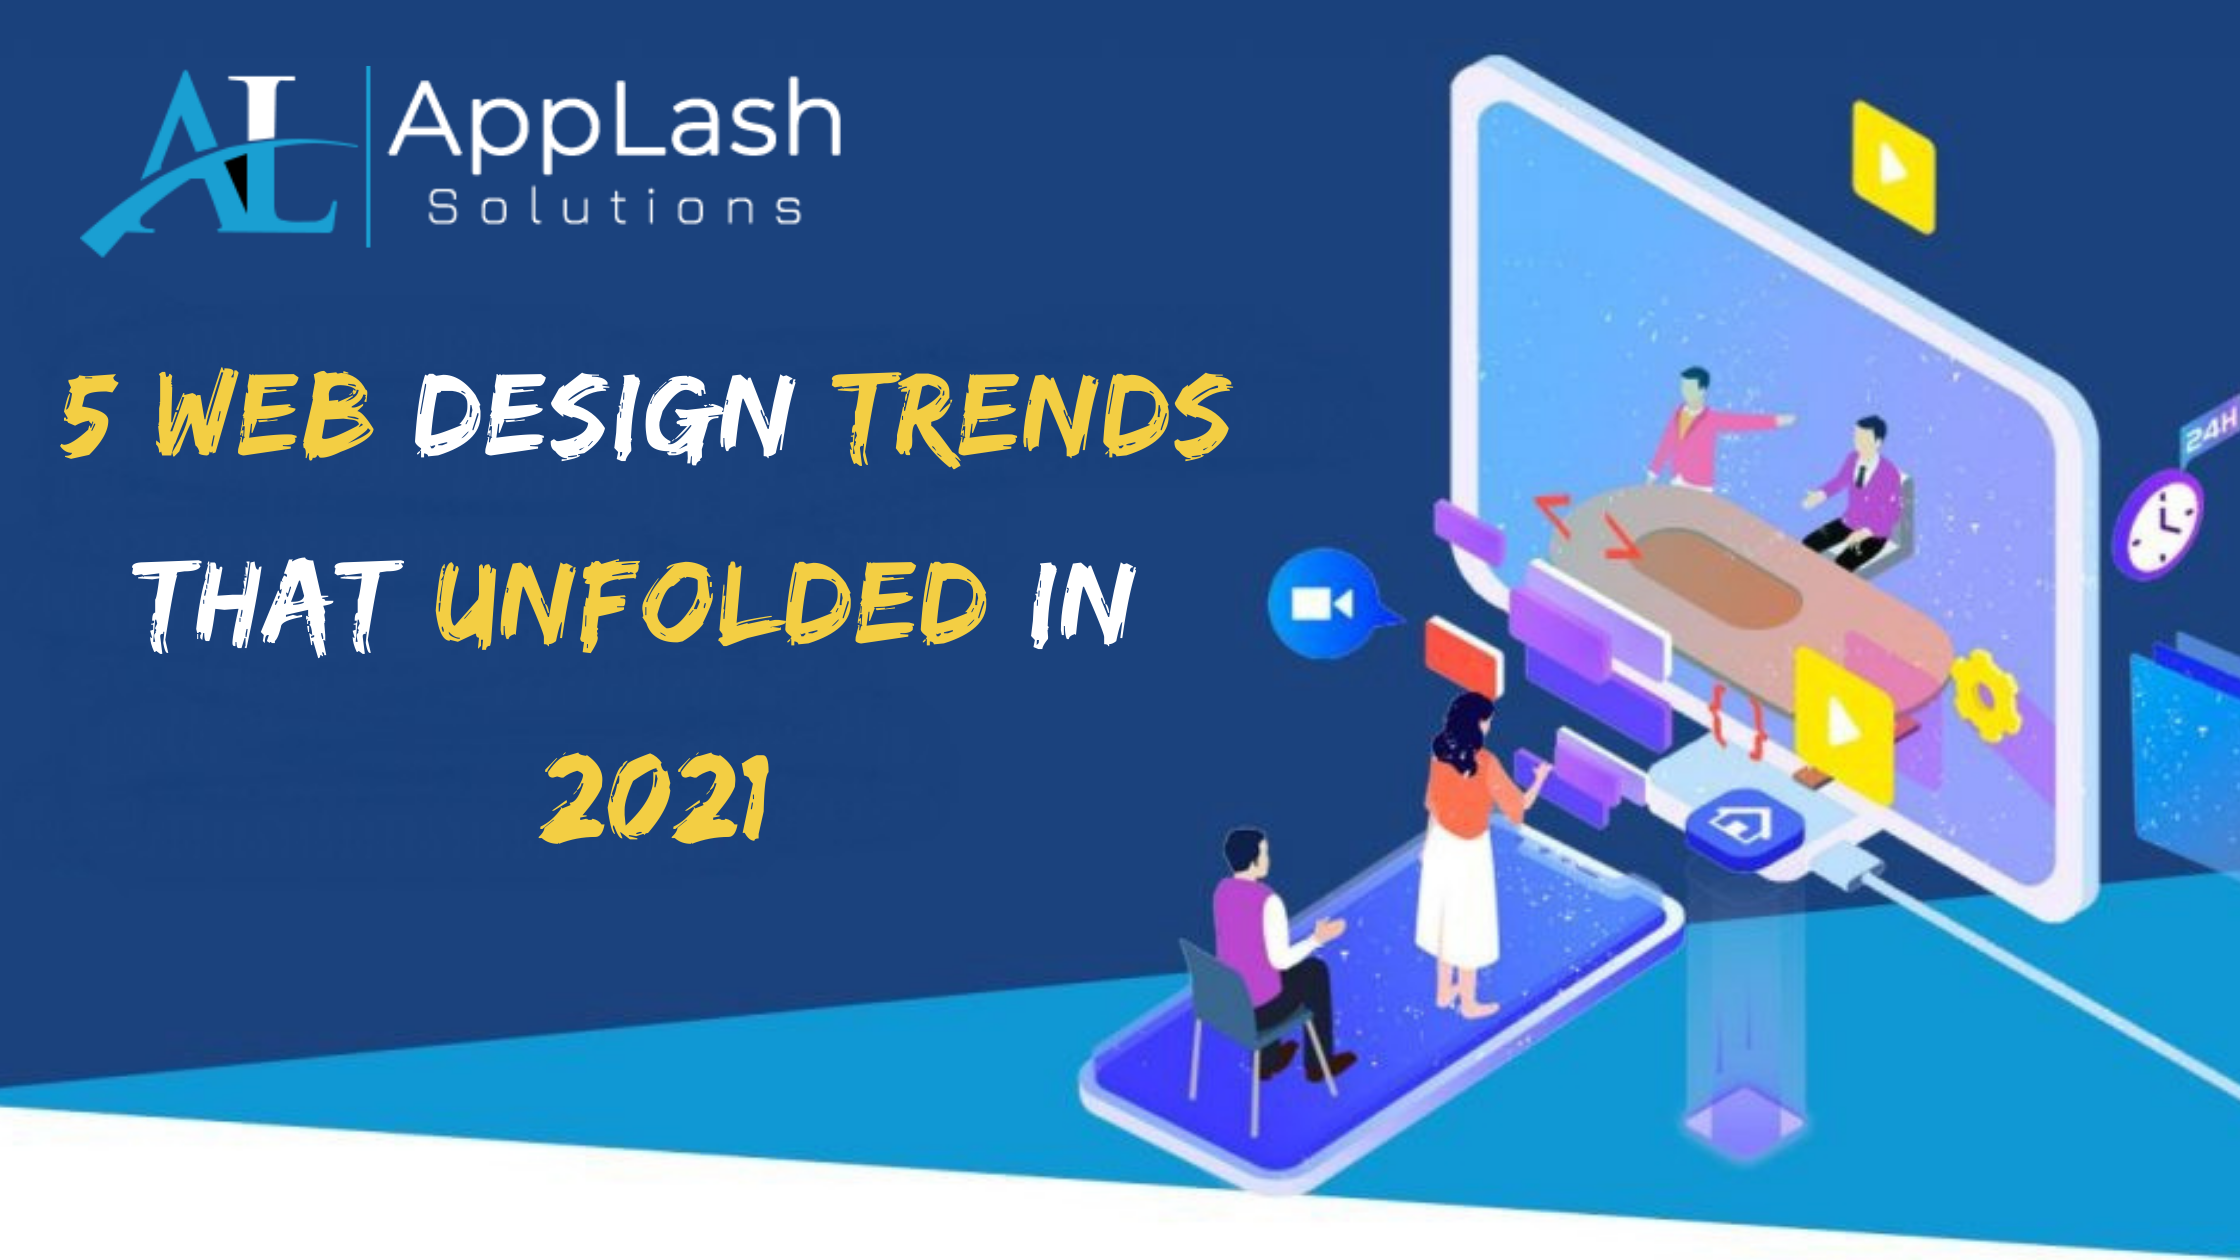 5 Web Design Trends That Unfolded in 2021